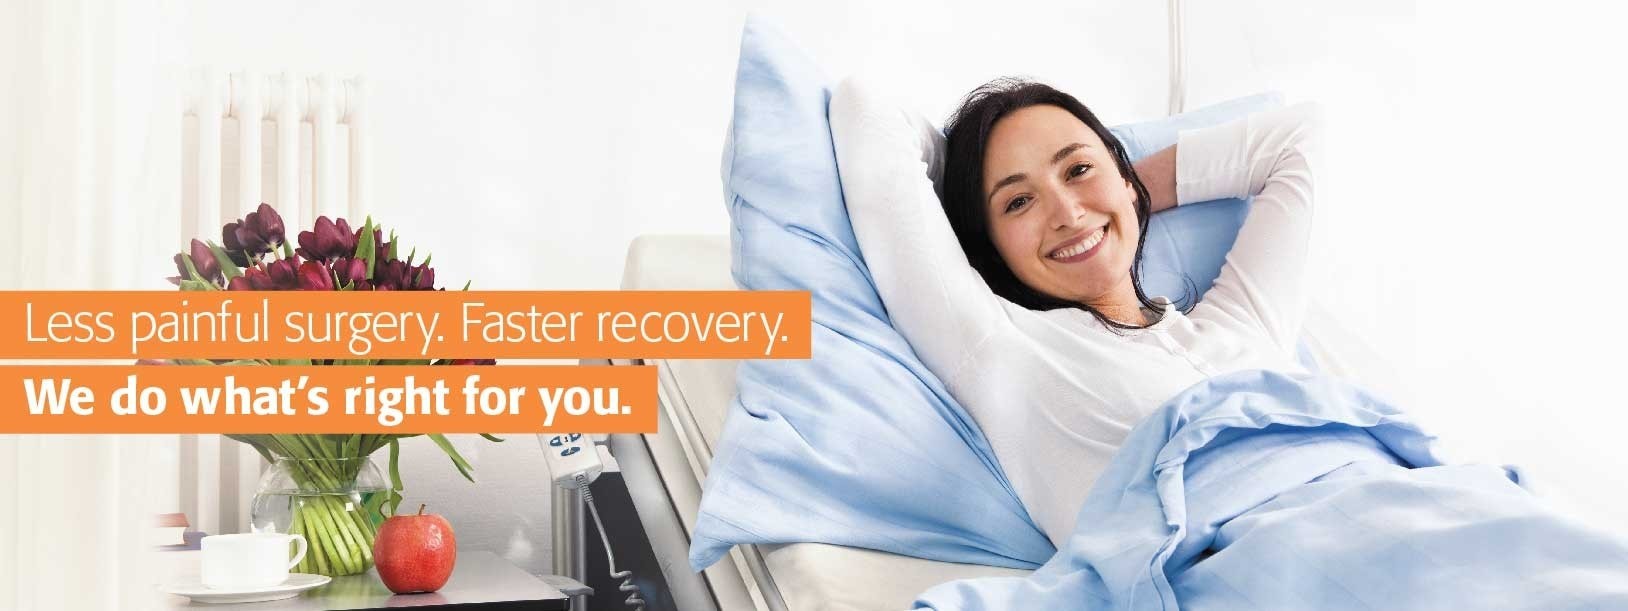 Less painful surgery. Faster recovery. We do what's right for you.